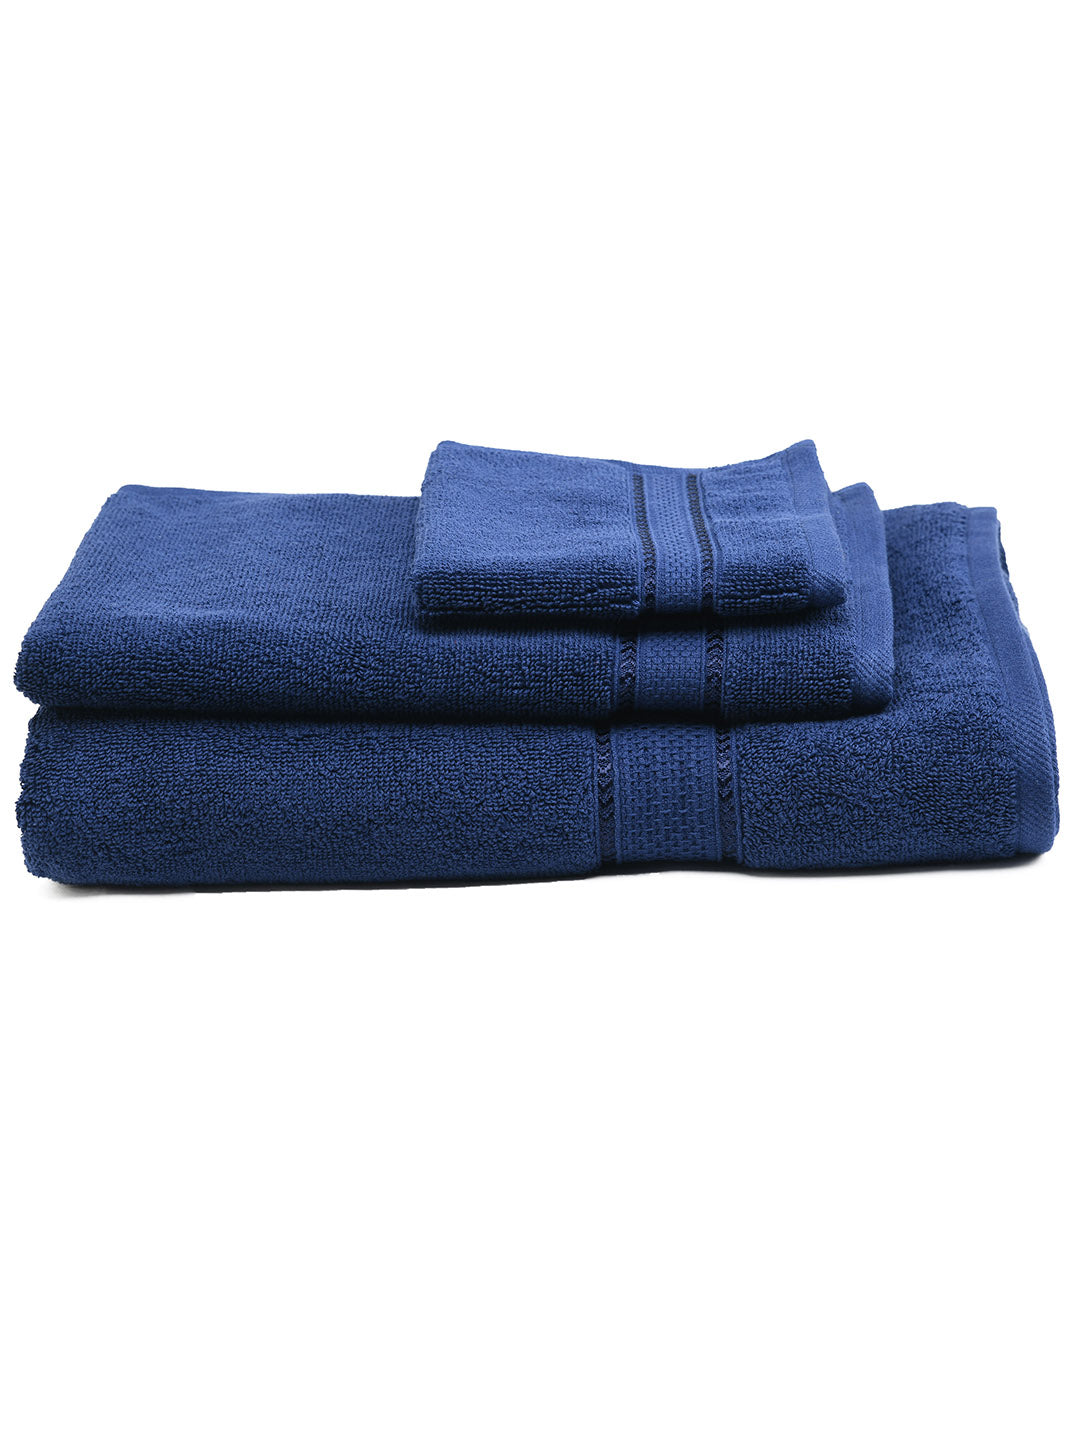 SWHF Chic Home Casual Bath, Hand and Washcloth Terry Navy Blue Towel- Set of 3